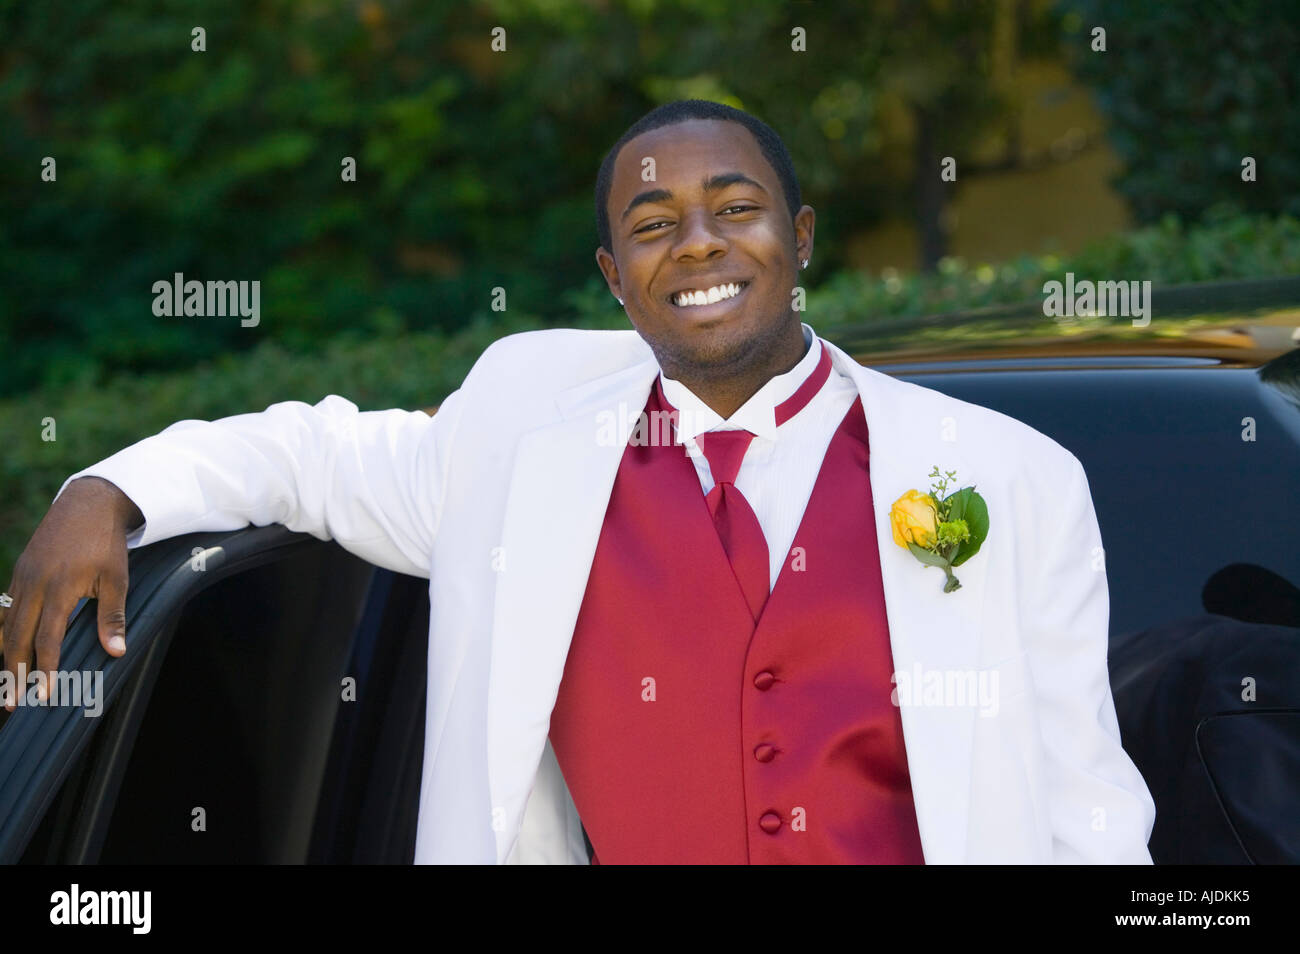 Teenage Boy in suit leaning on limo, portrait Stock Photo